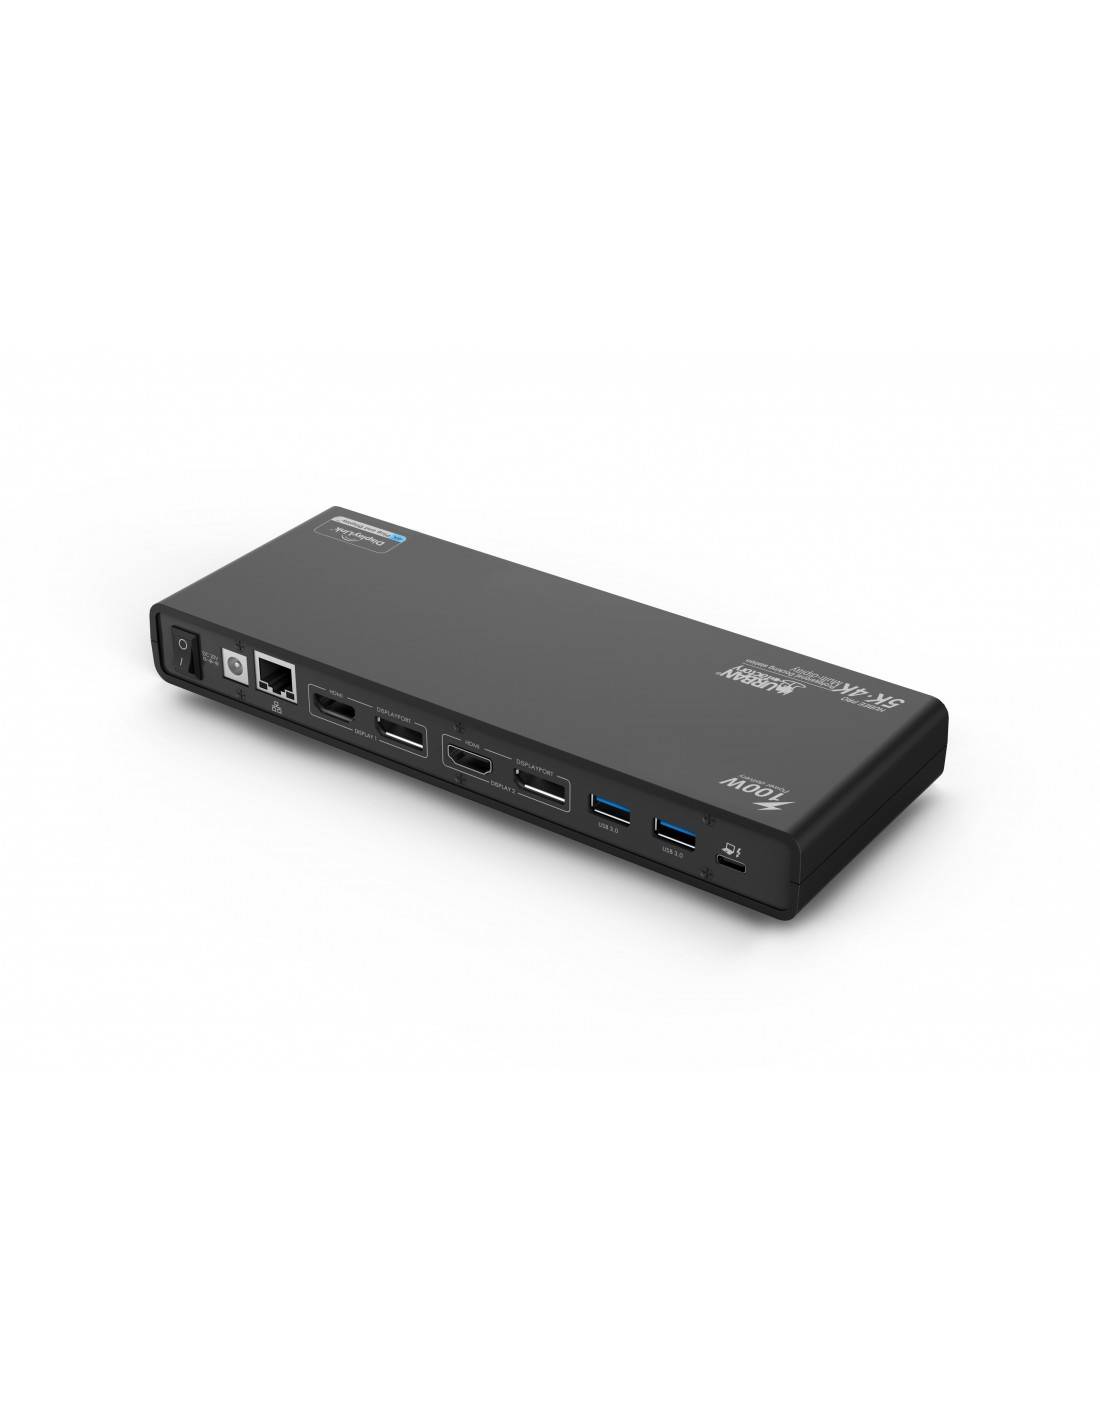 Rca Informatique - Image du produit : HUBEE PRO DOCKING STATION WITH AN EXTERNAL POWER SUPPLY OF 130W